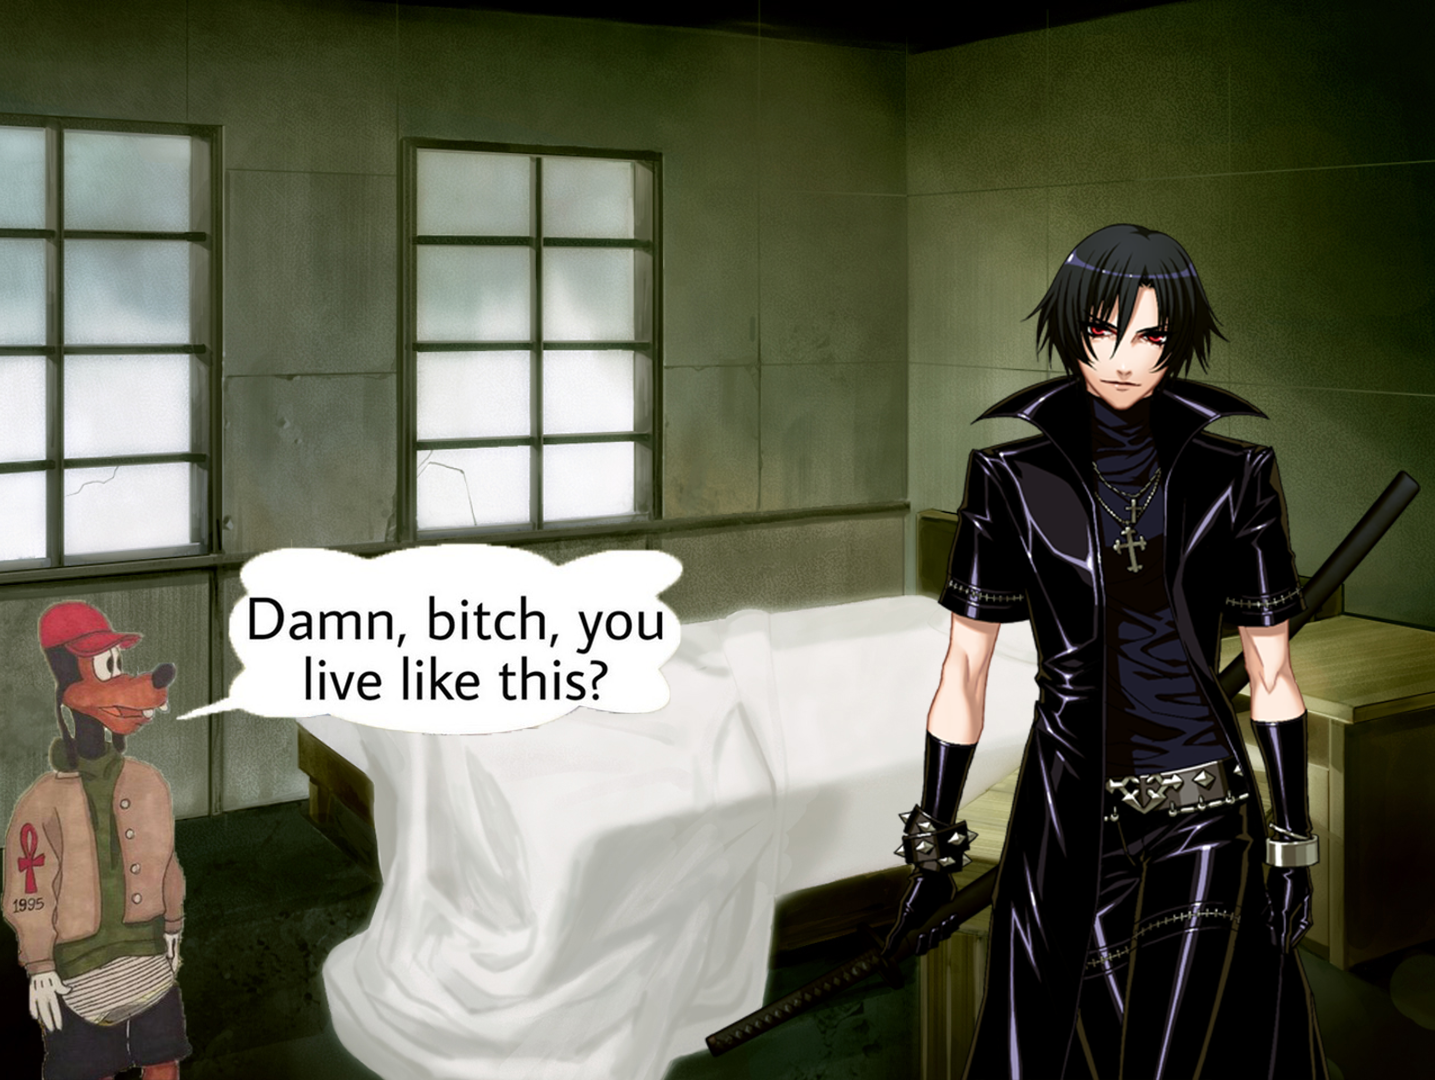 Meme that I made showing Shiki in his broke ass apartment bedroom with the 'Bitch you live like this?' Goofy image.